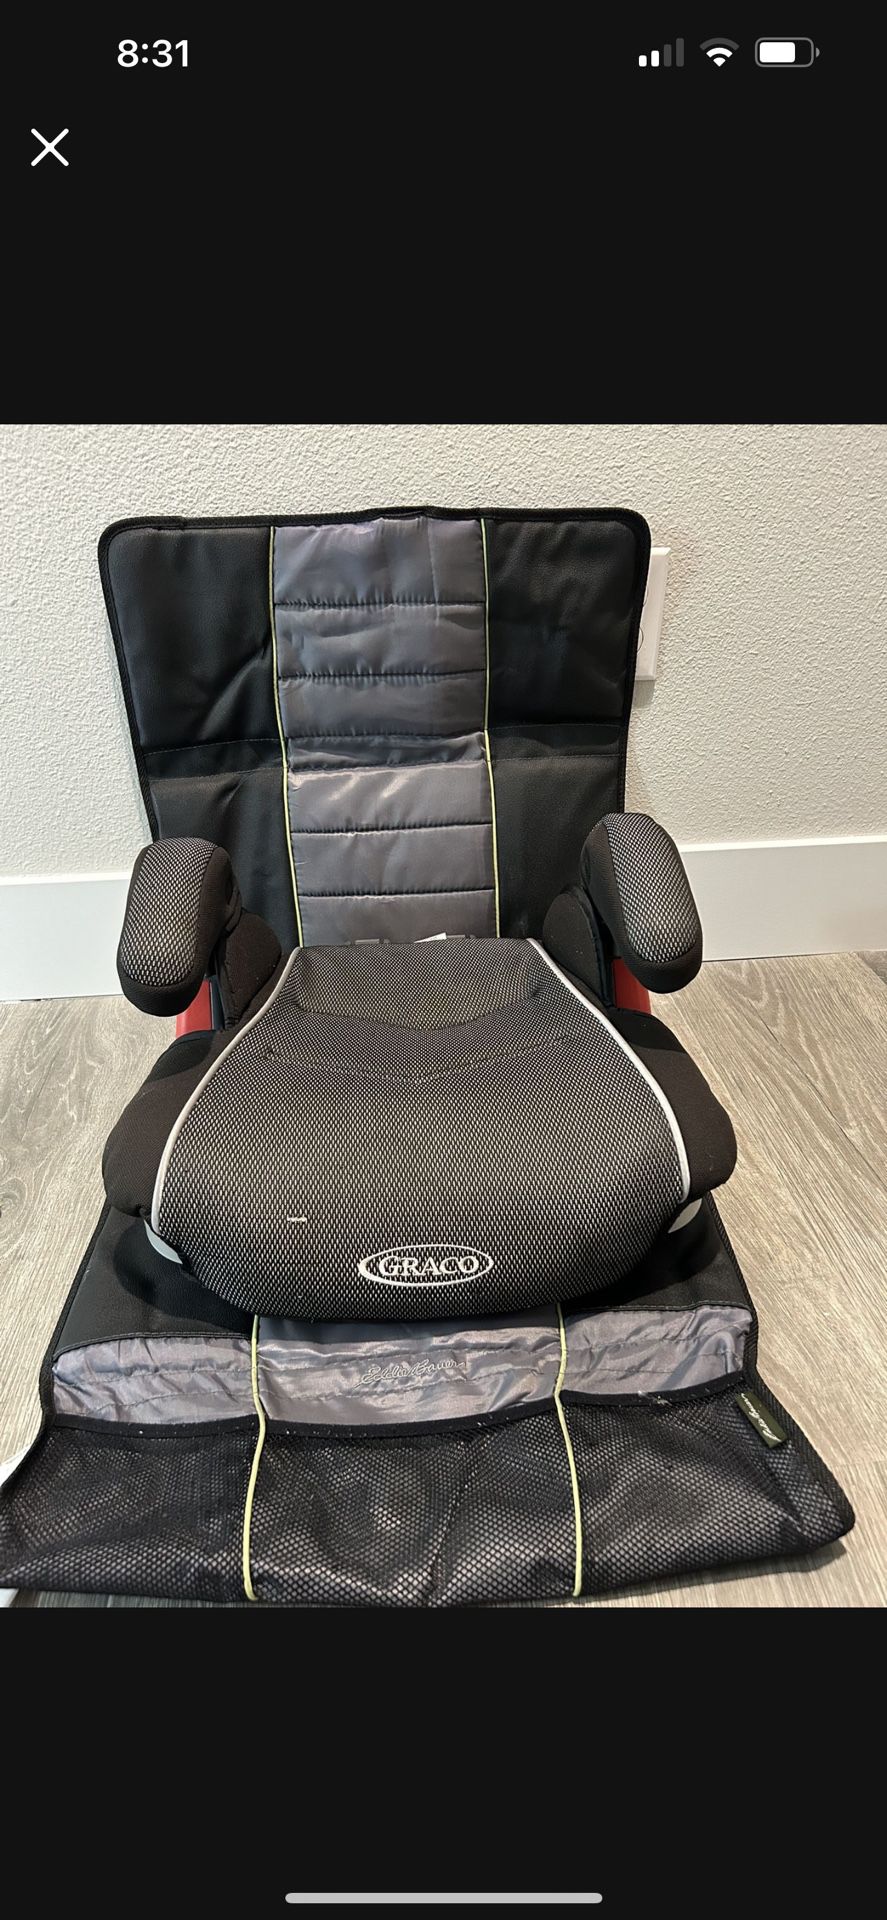 Booster Seat With Car Seat Protecter